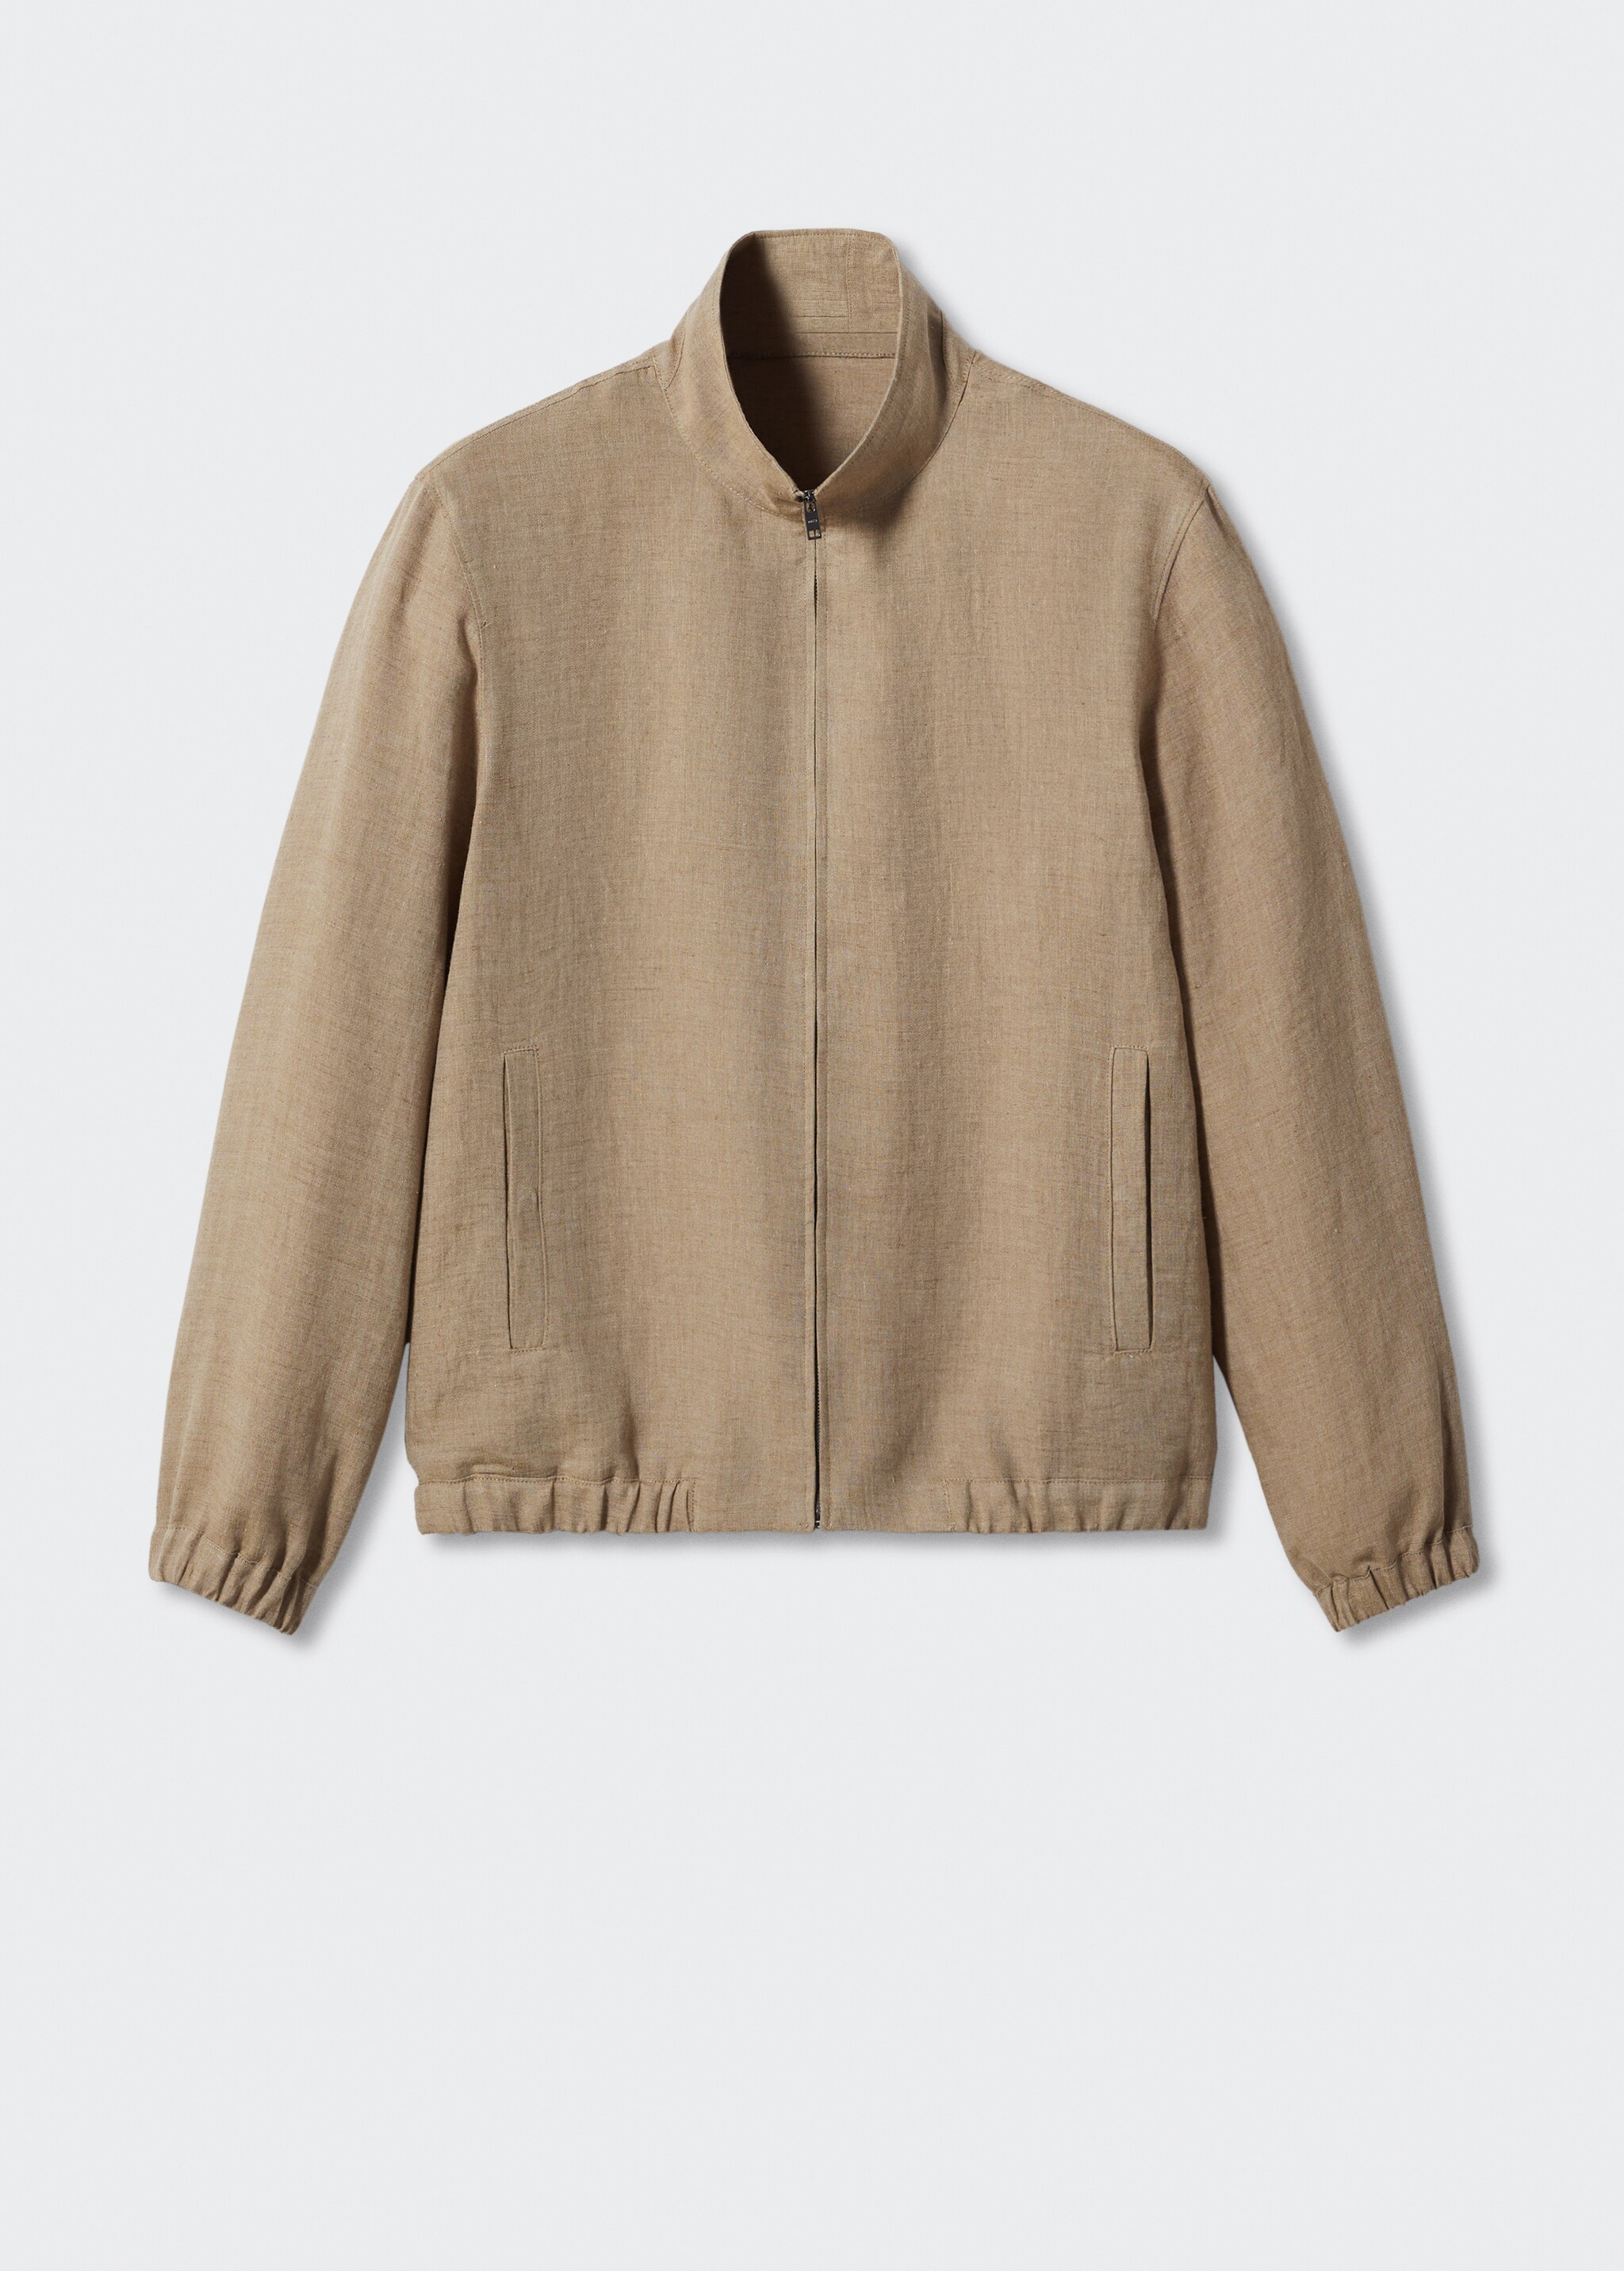 Bomber jacket 100% linen - Article without model